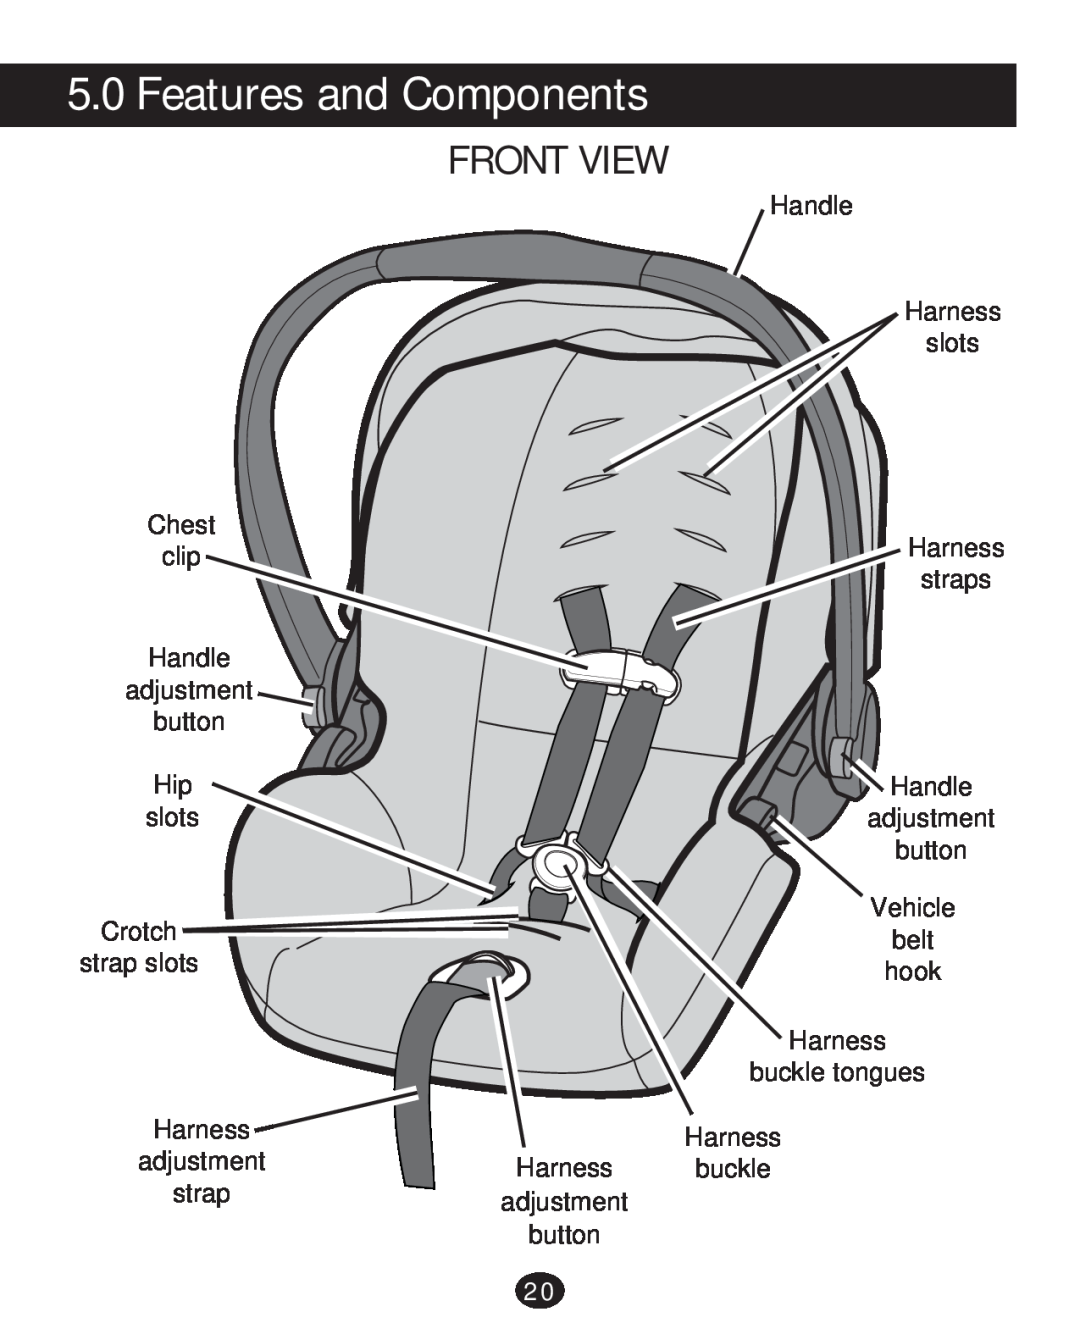 Graco 30 manual Features and Components, Front View, Harness adjustment 